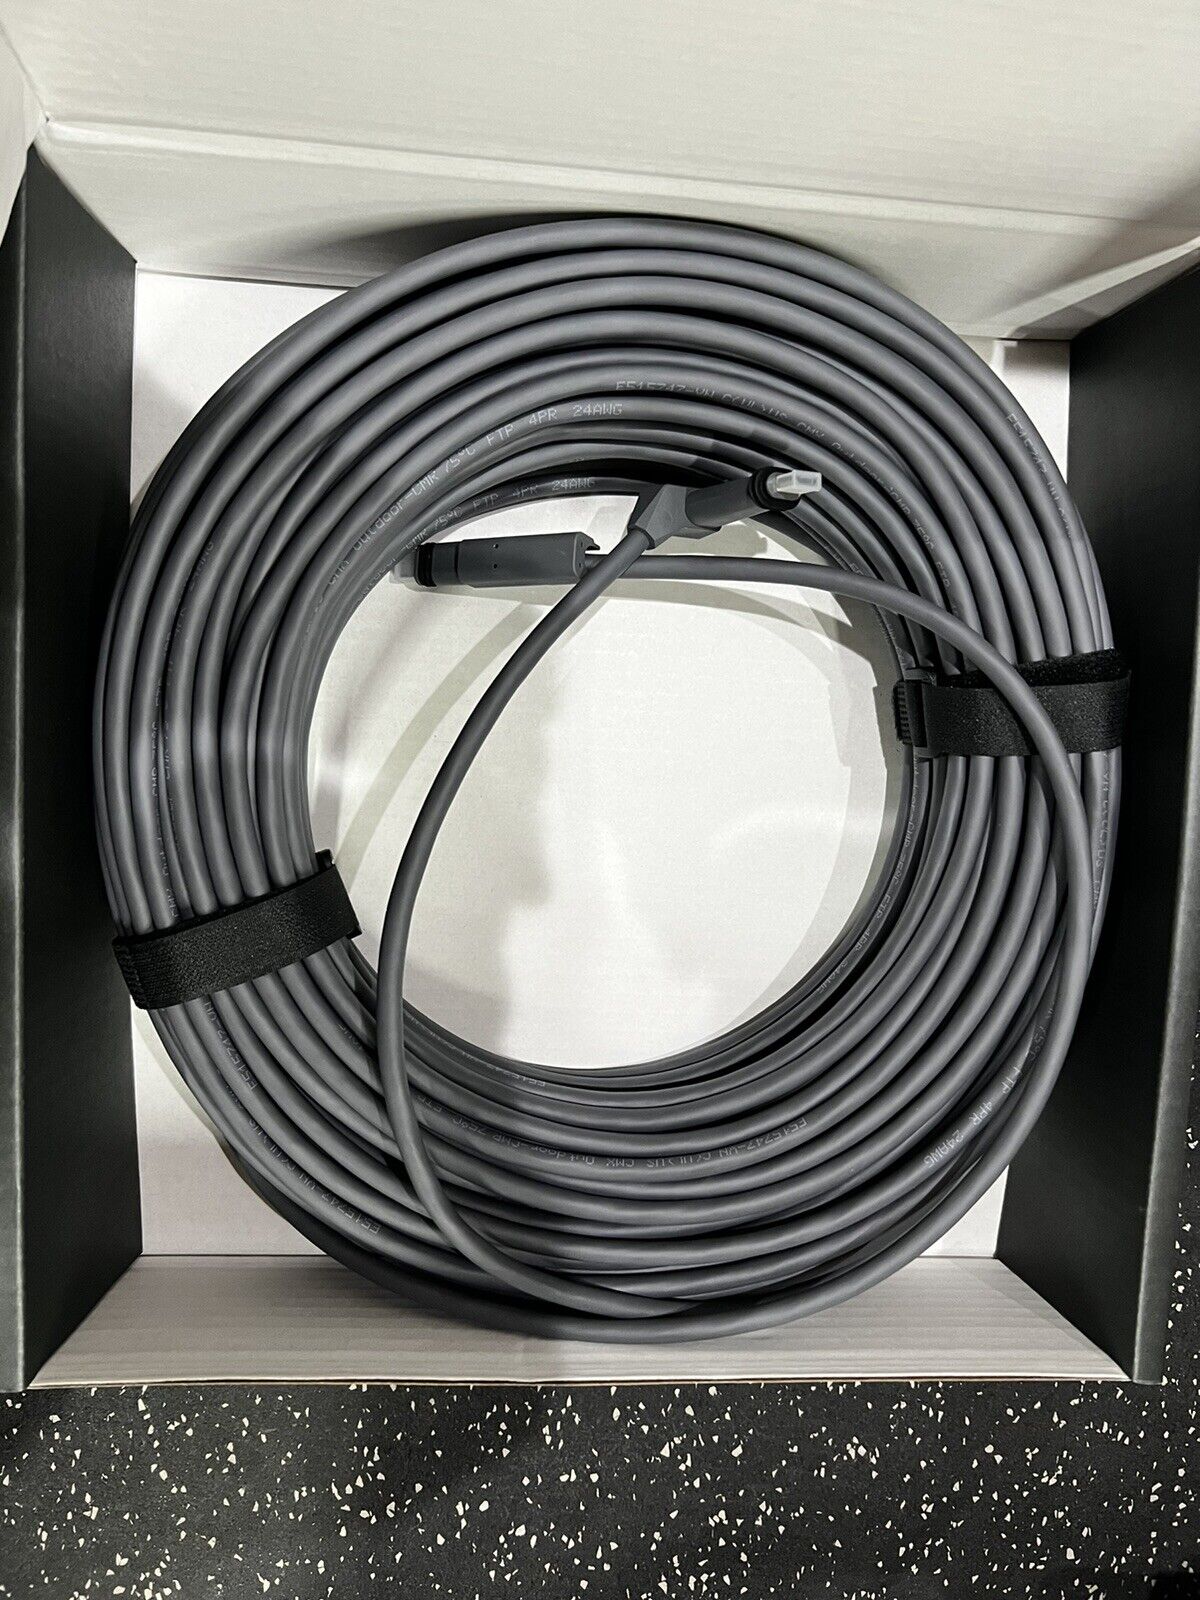 Starlink Satellite 150ft Cable For V2 Rectangle Dish *Brand New*PN: 01500551-505